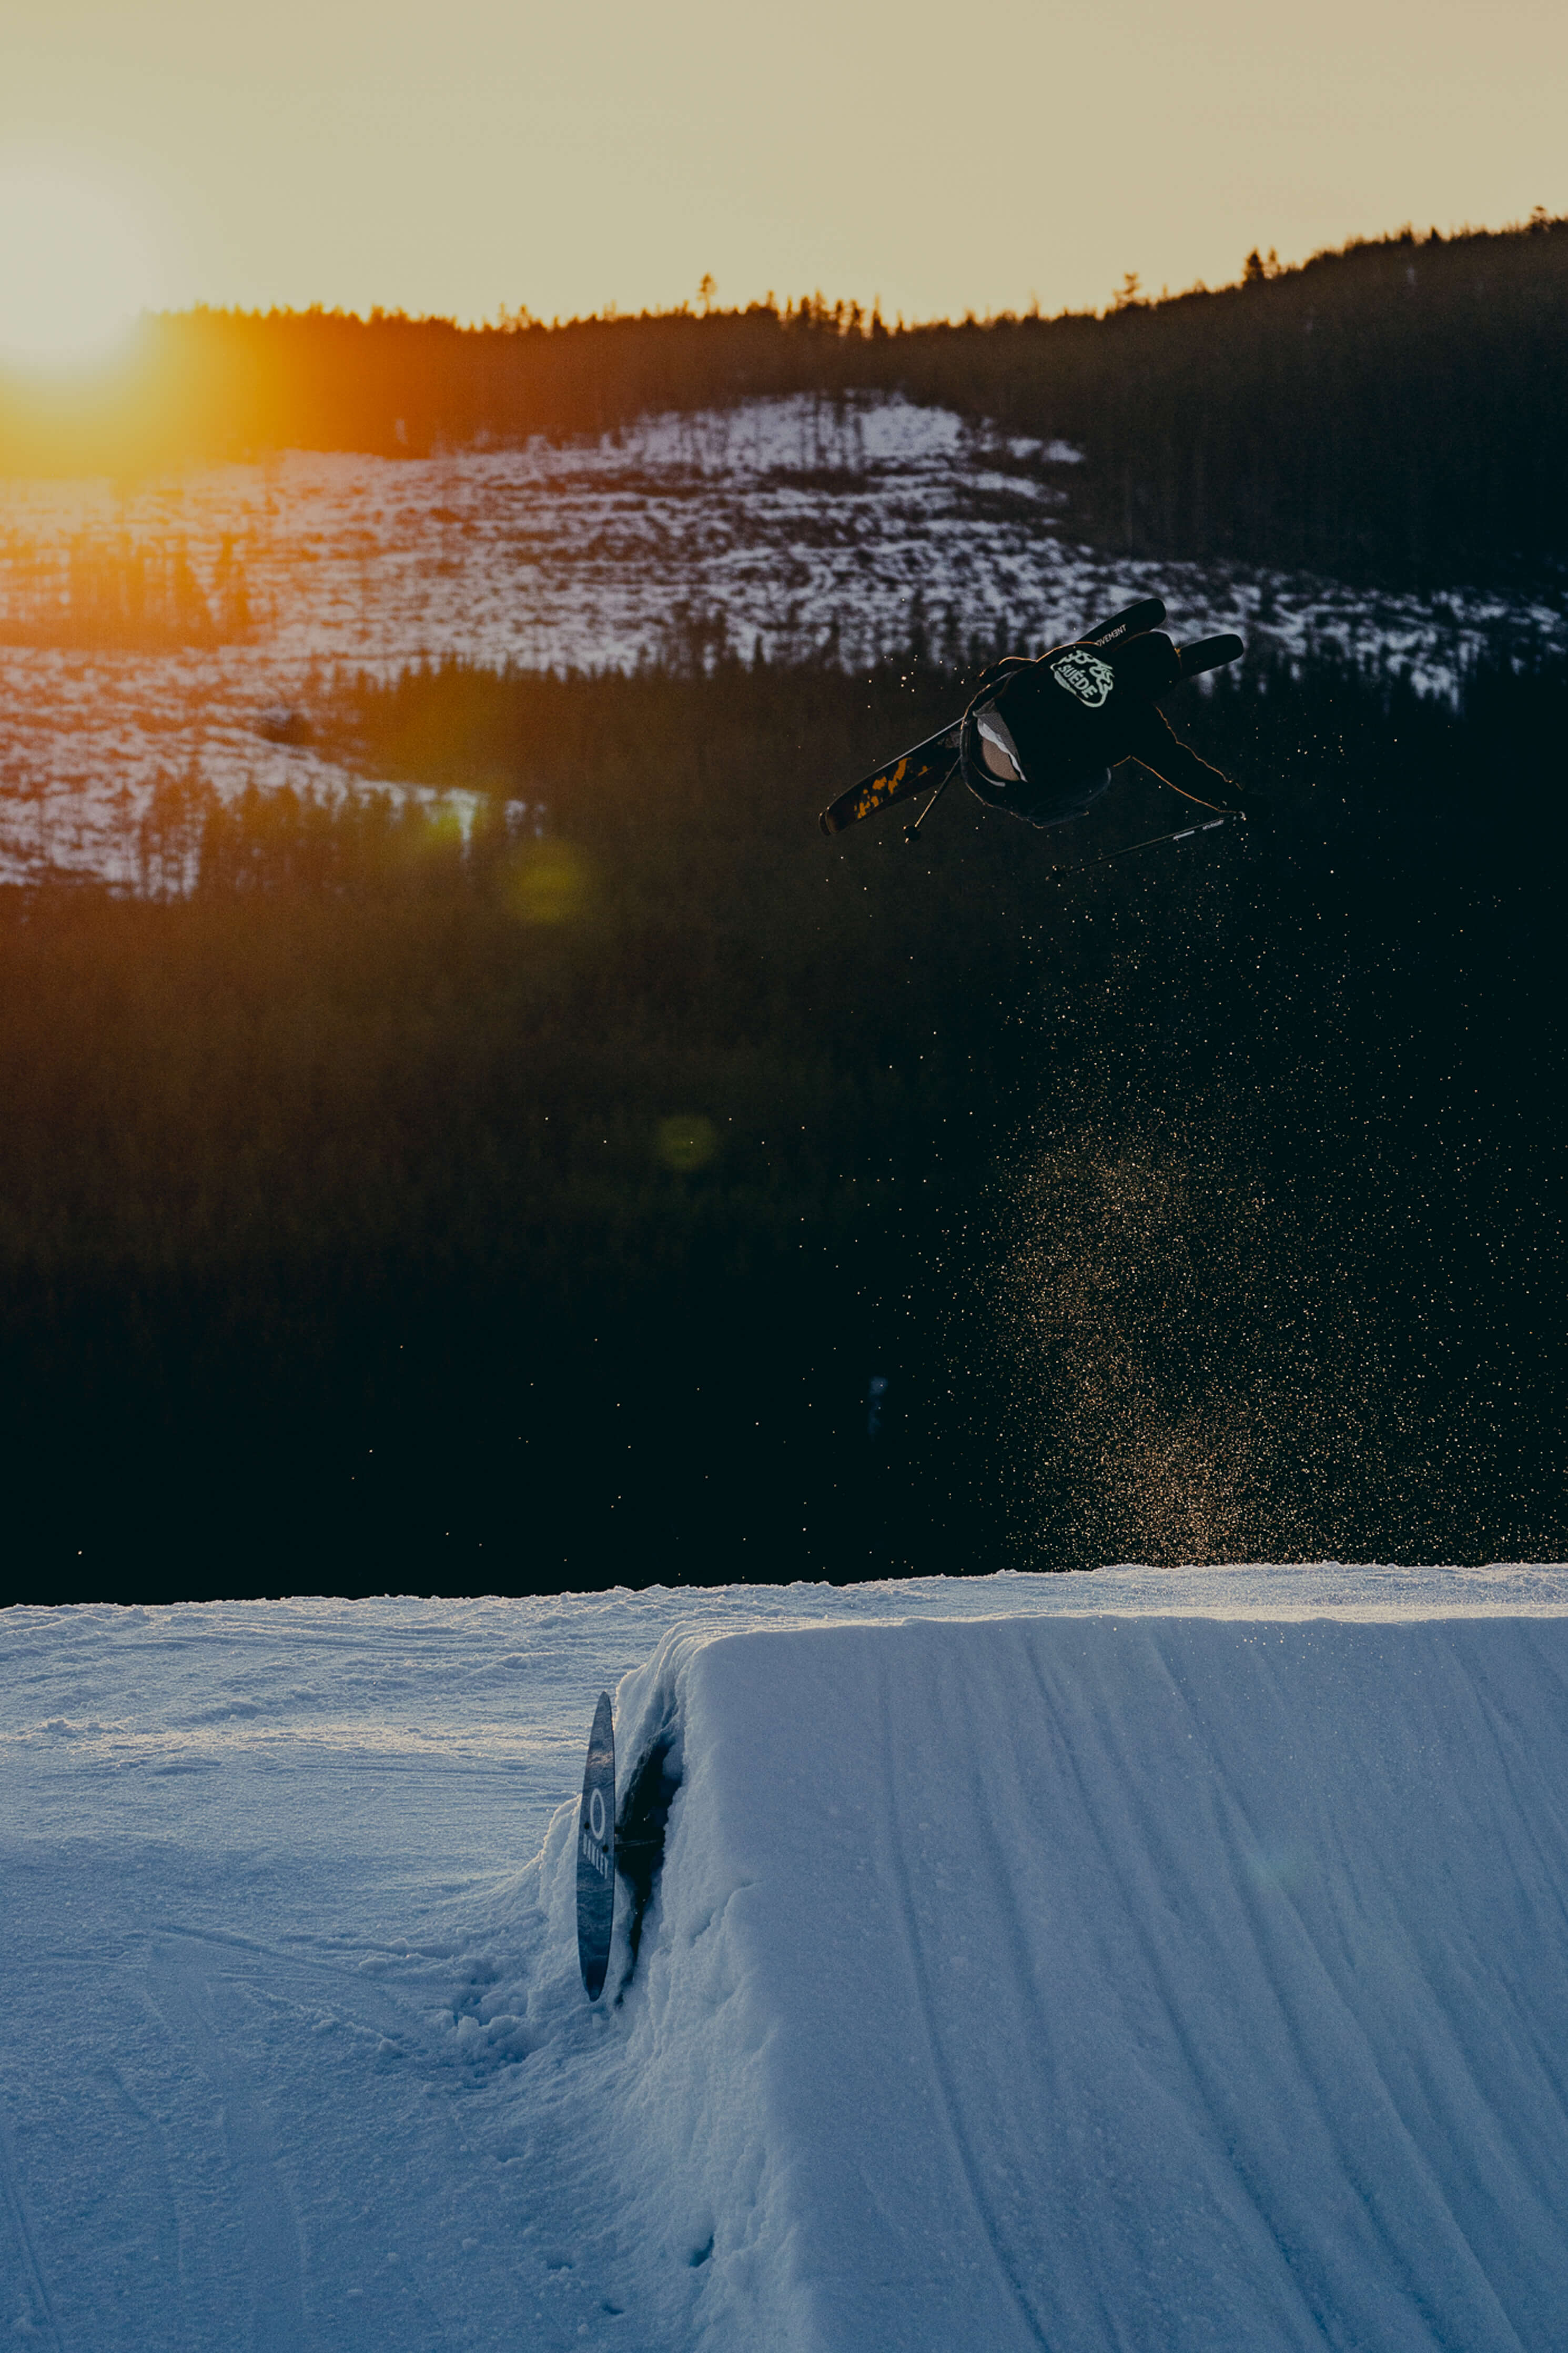 Hugo Burvall riding at Kimbo Session with a sunset and the Movement Fly 105.